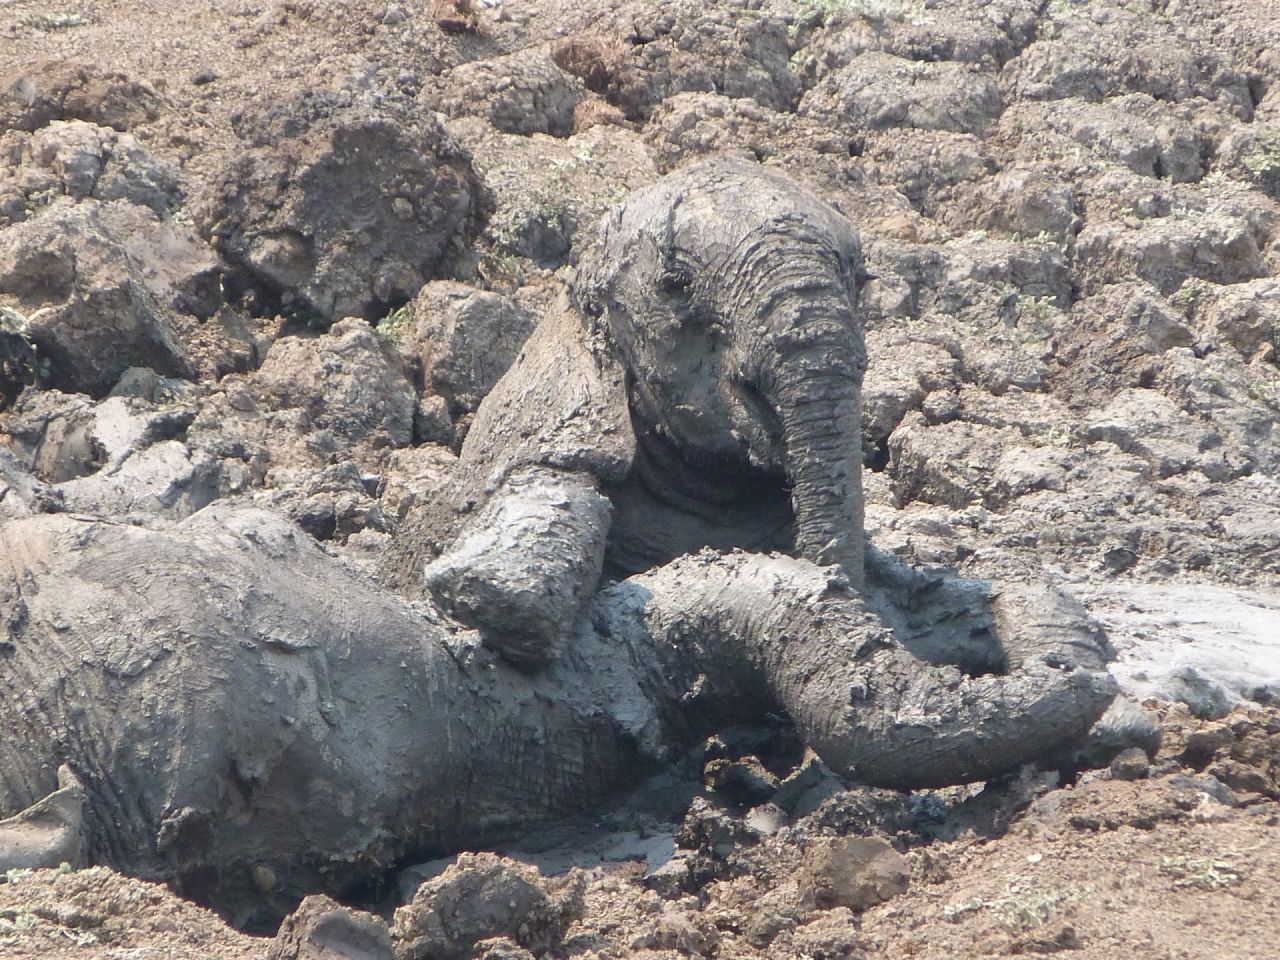 A mother and baby elephant were found distressed and dehydrated, sinking in deep mud at a safari park in Zambia. 